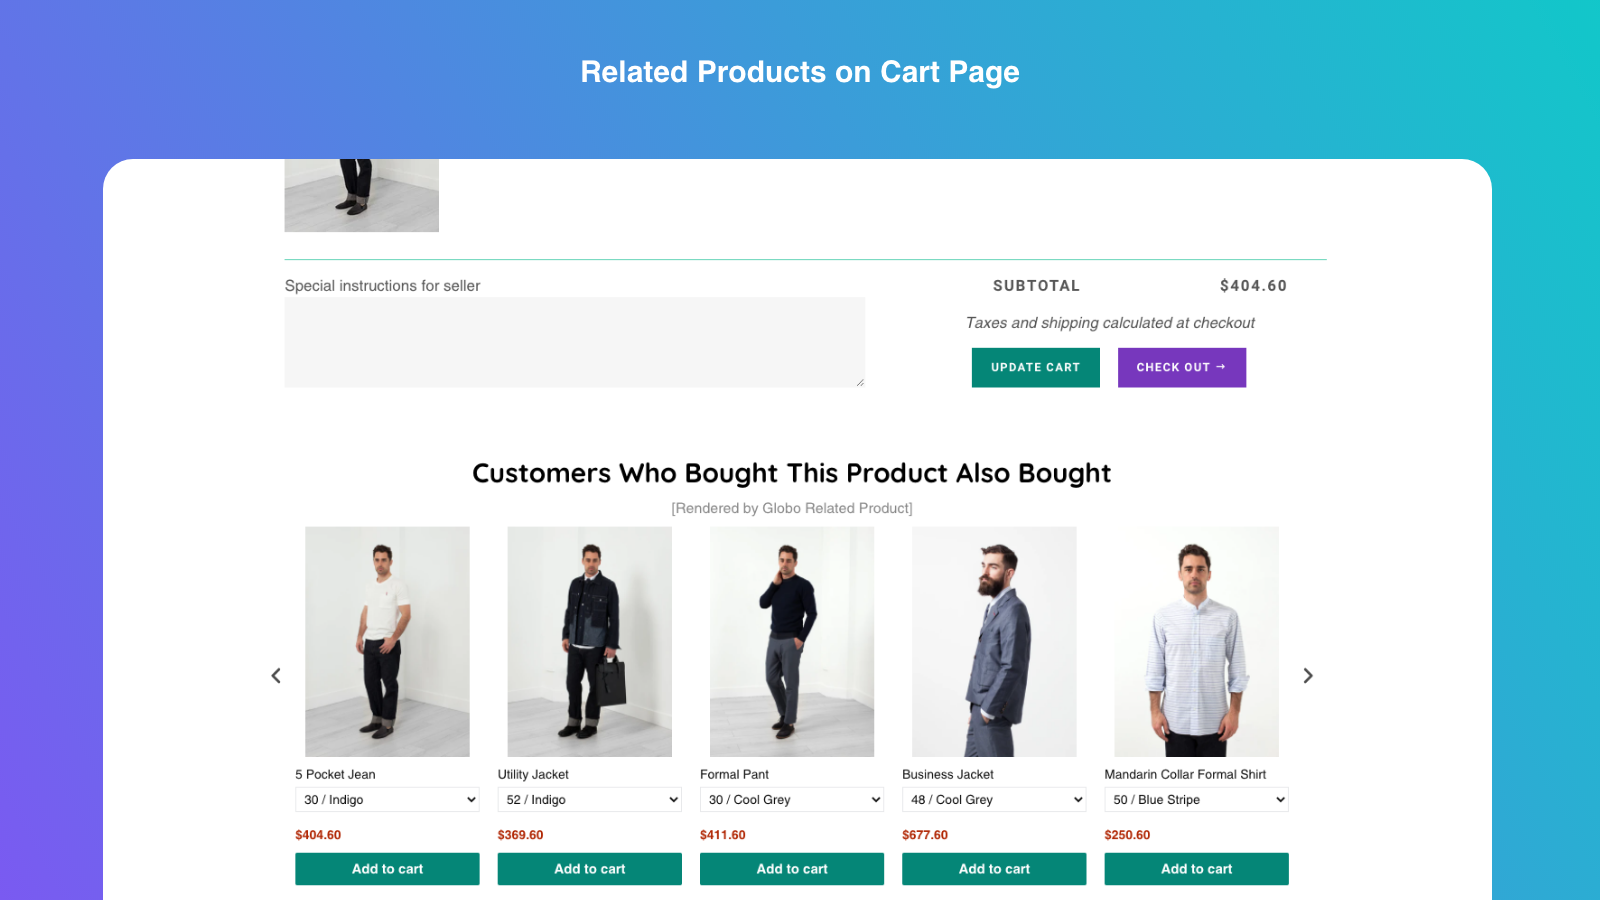 Related product on cart page